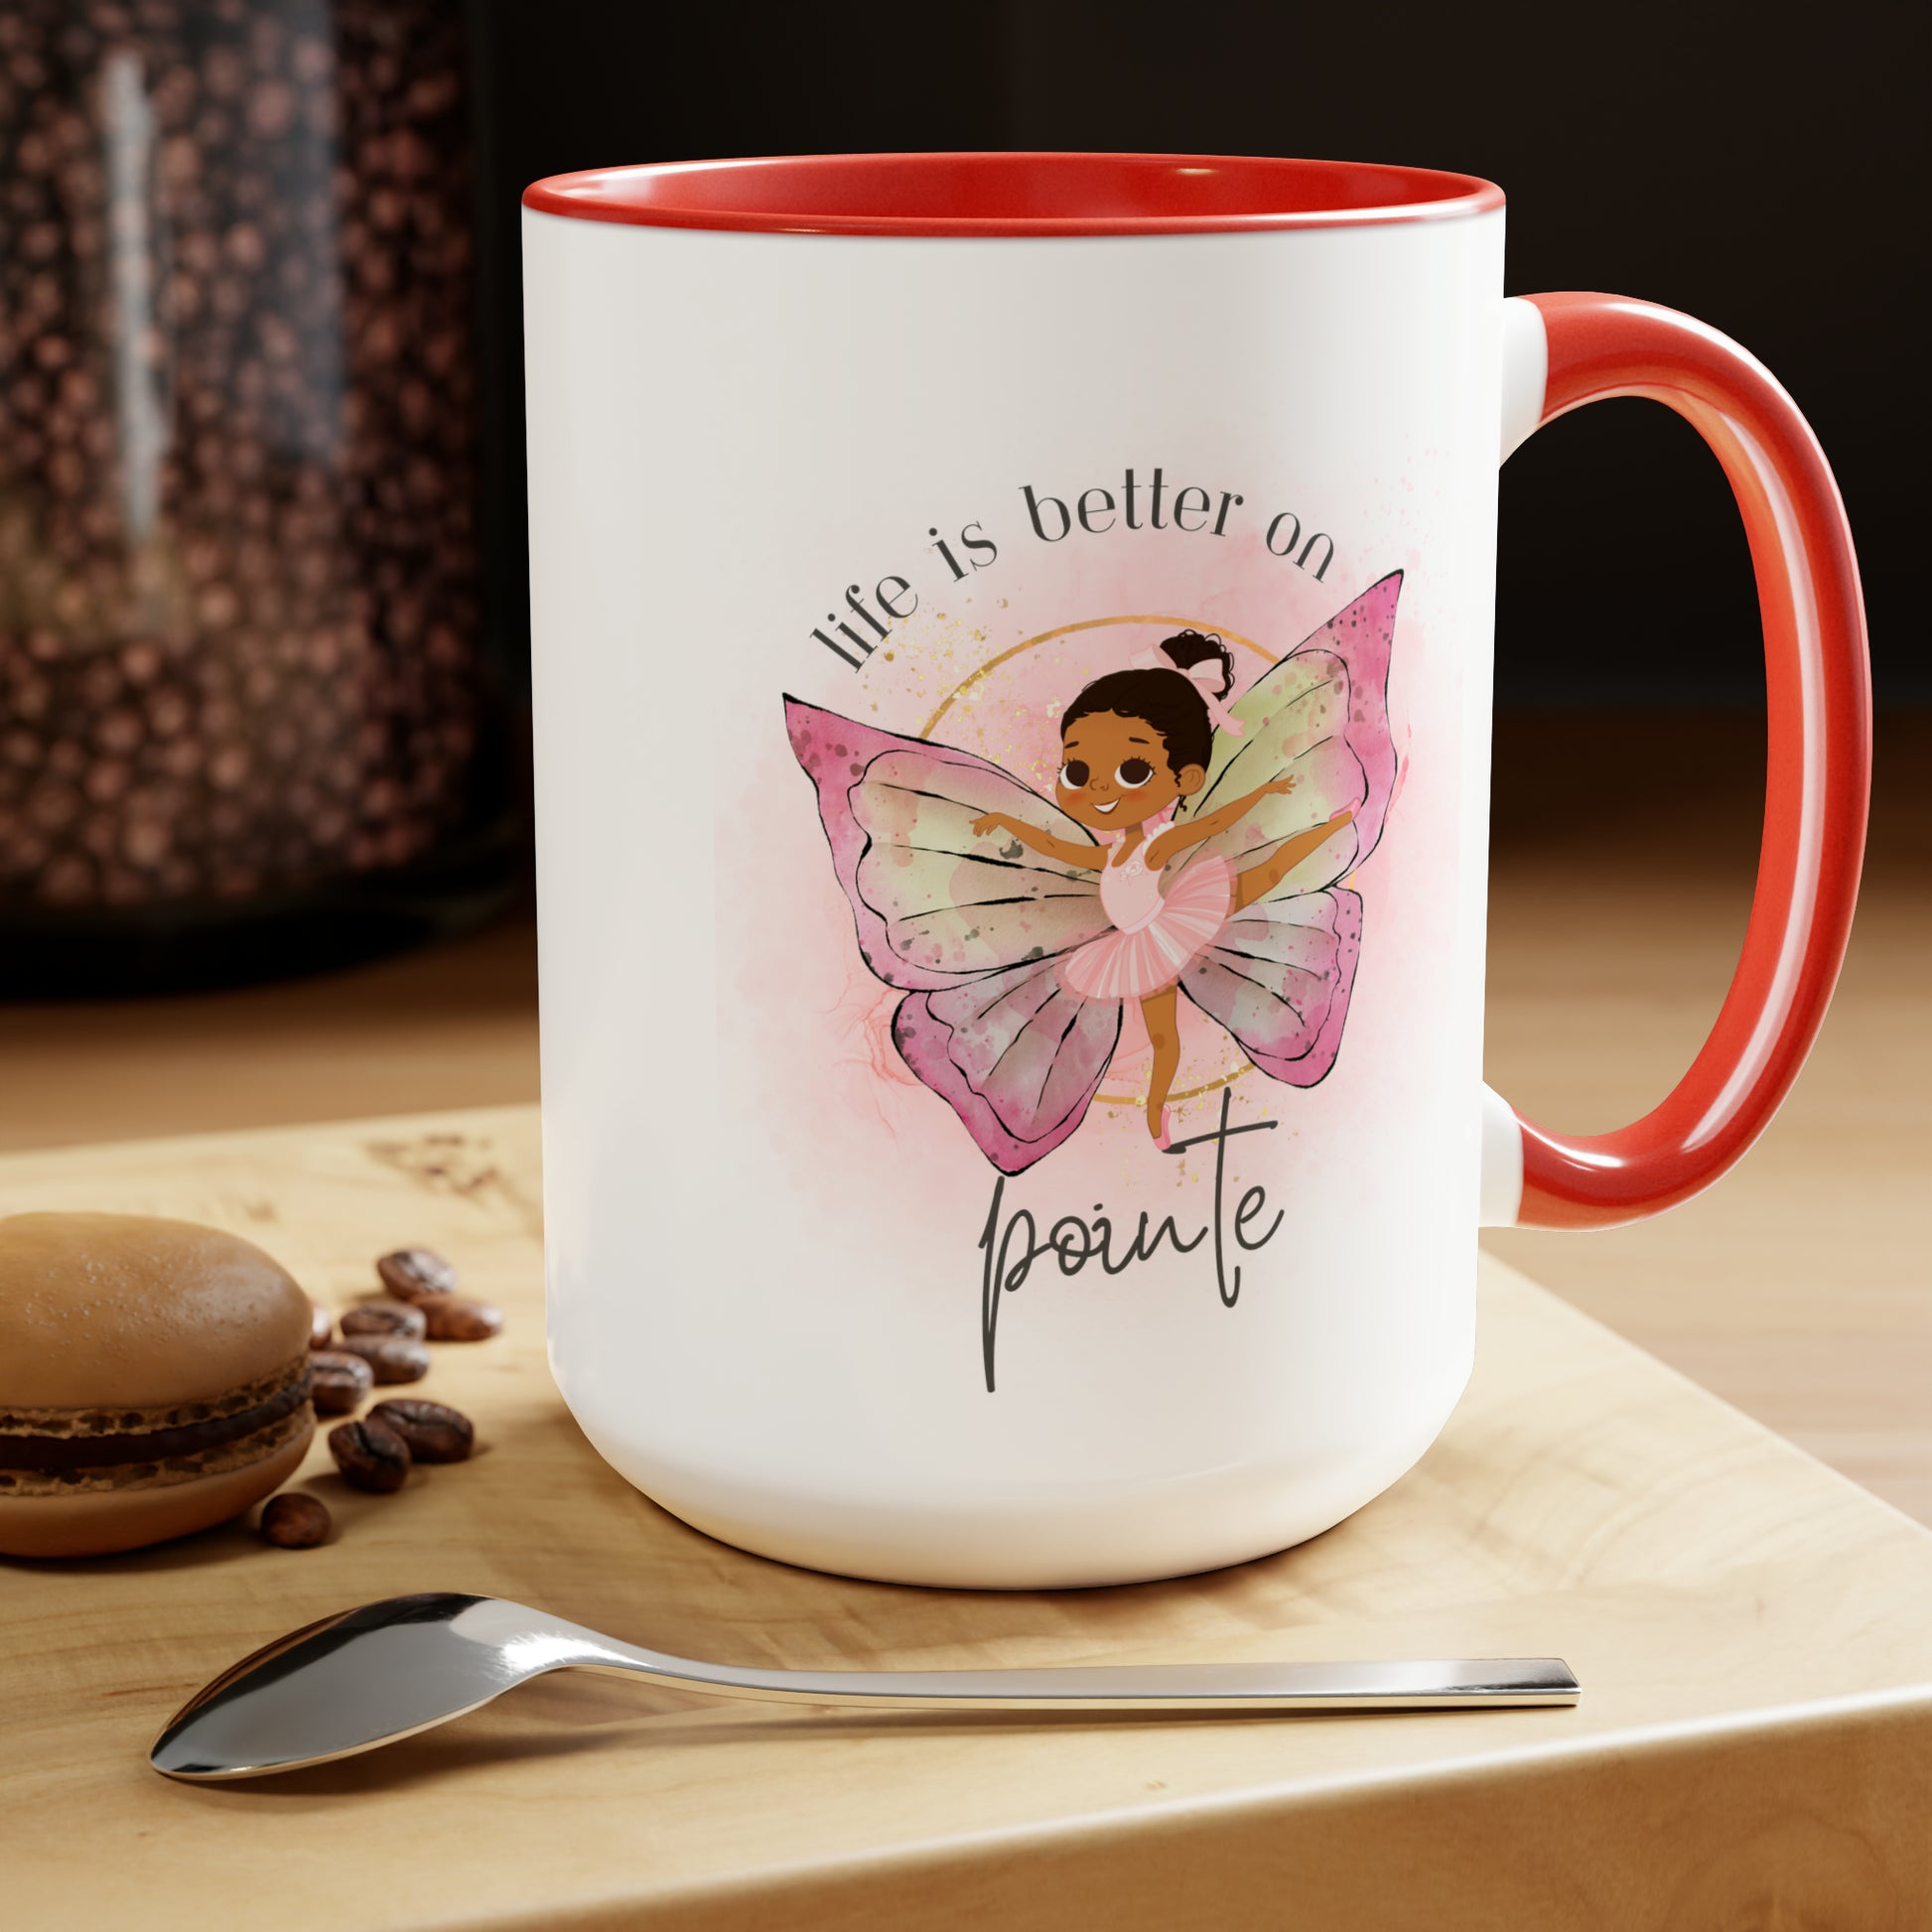 Two-Tone Coffee Mugs, 15oz - Young Ballerina - Life is better on pointe - red rim